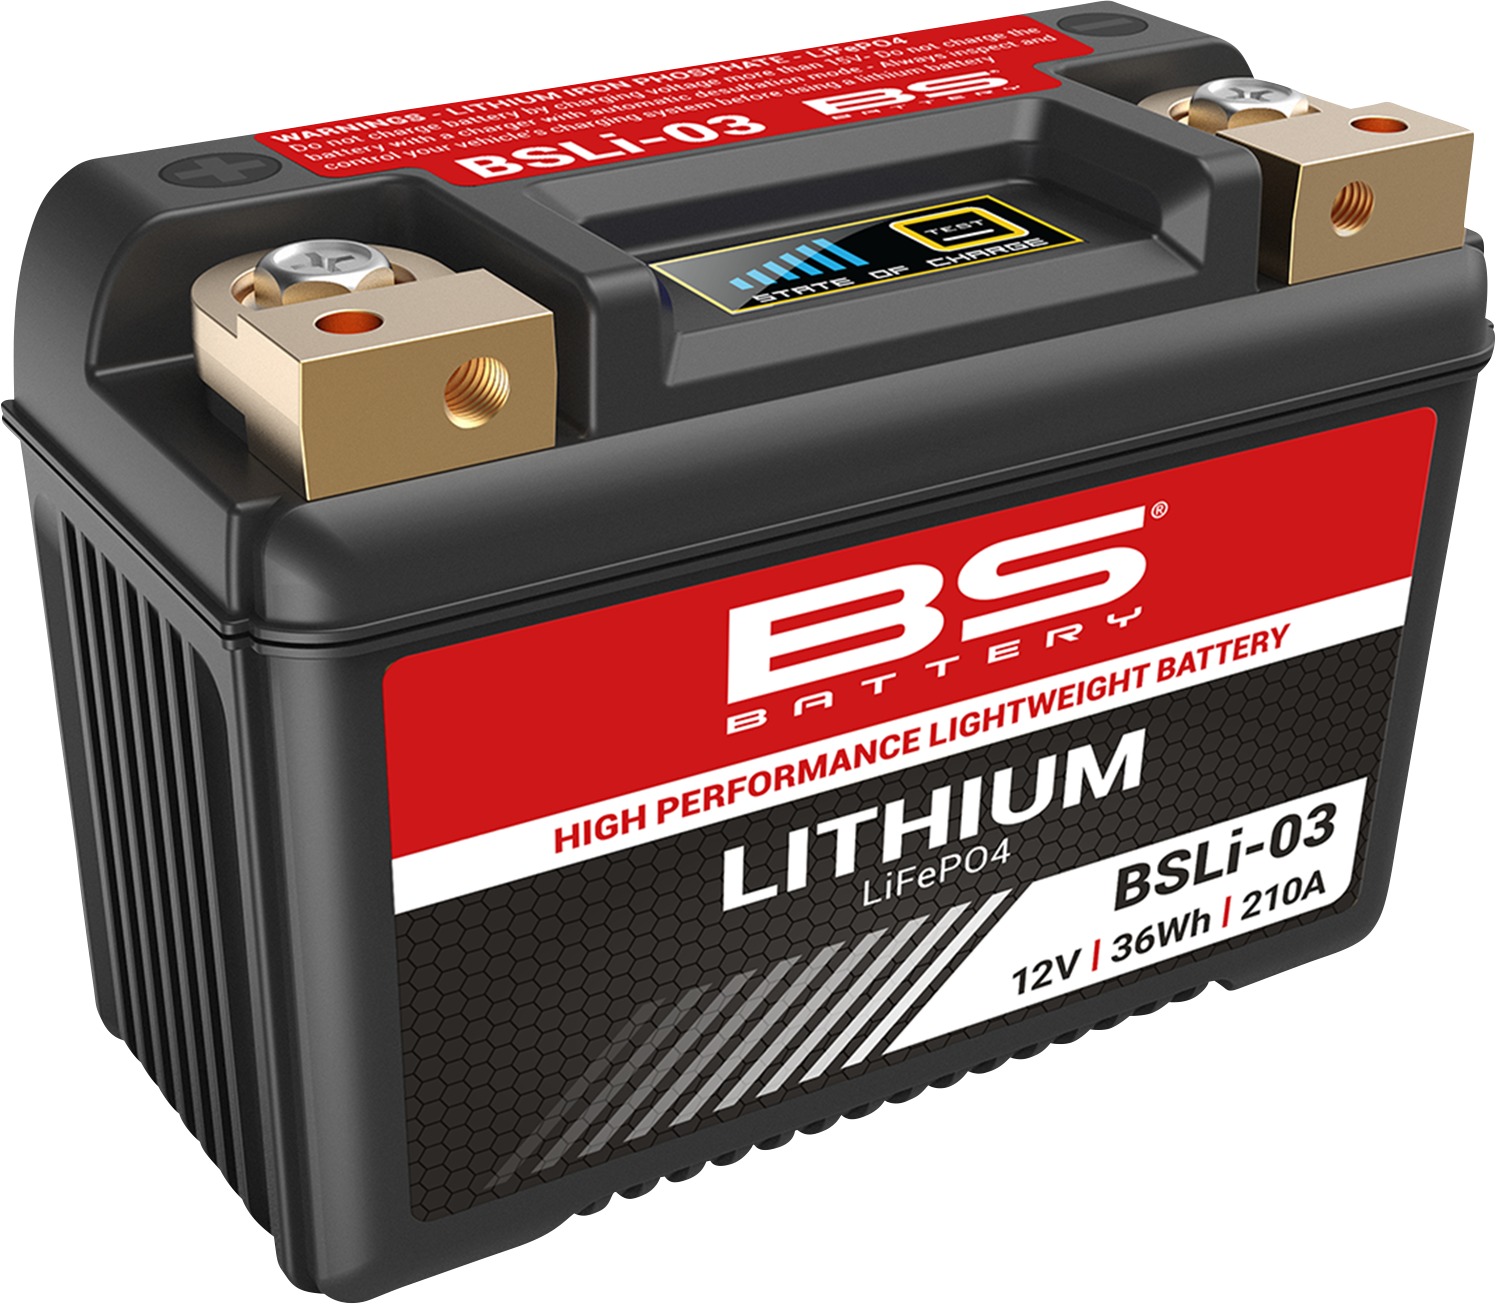 BSLI-03 Lithium Battery, 36Wh, 210 Amps - Replaces YB7-A, YT7B, YT9B, YTX7A, YTX9 - Click Image to Close